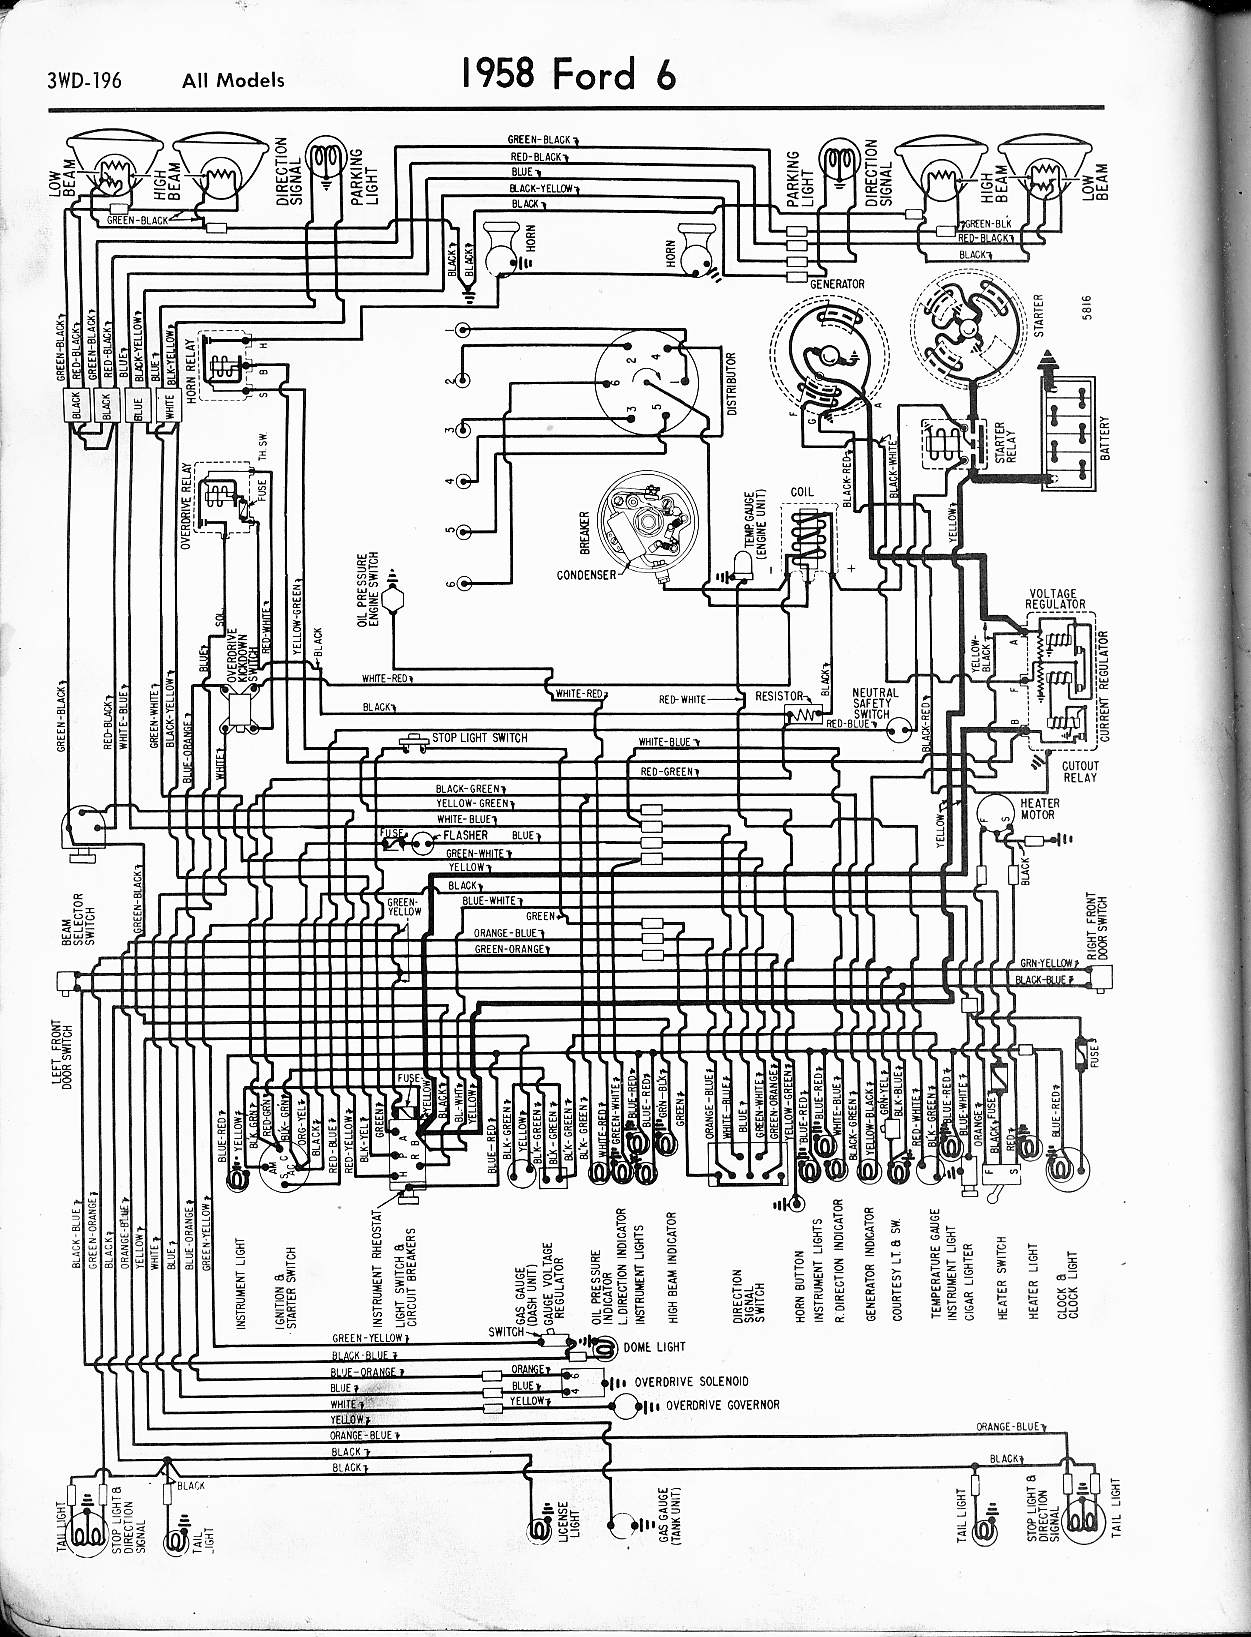 1973 Ford F250 Wiring Diagram from www.oldcarmanualproject.com